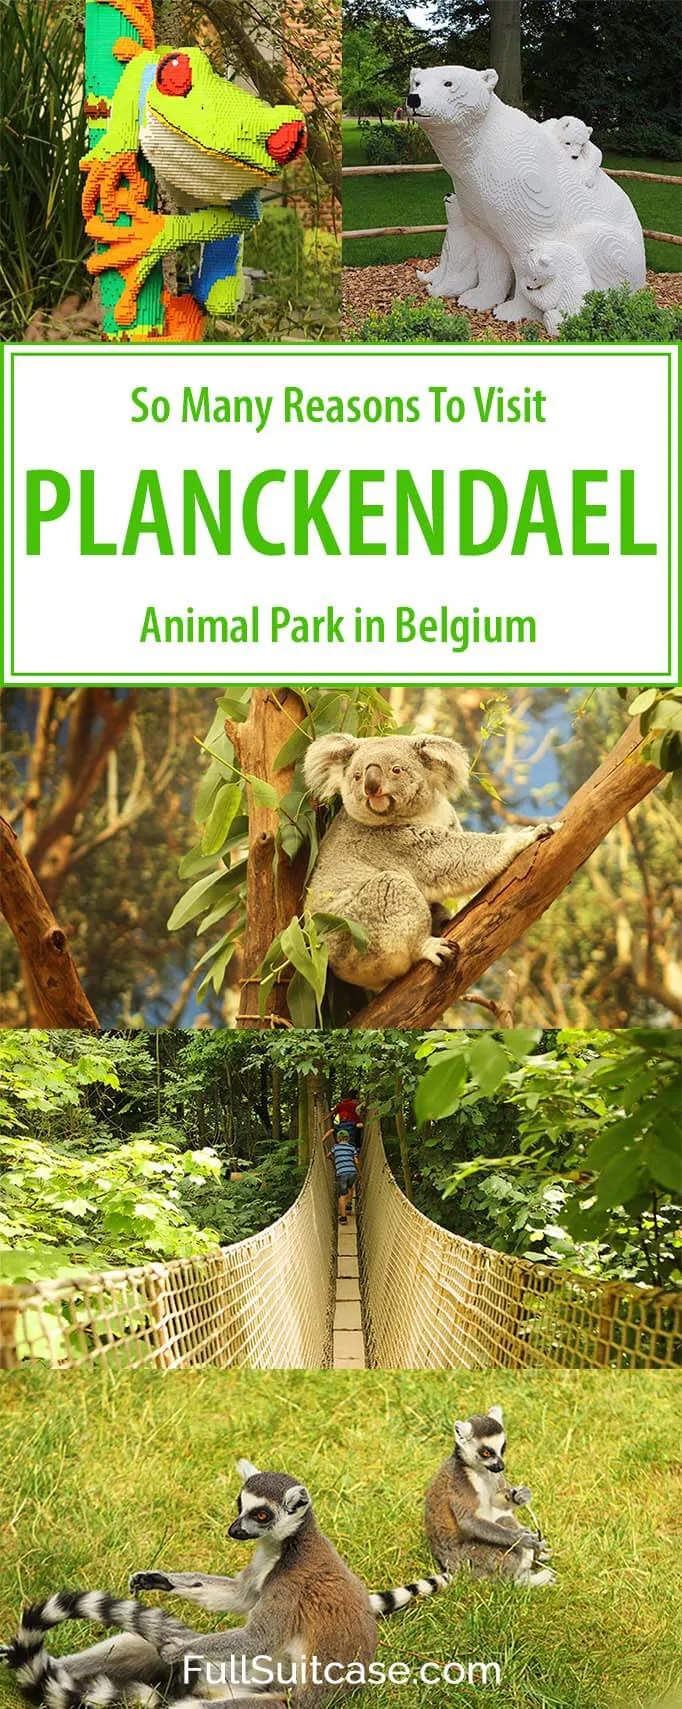 There are so many reasons to visit Planckendael animal park in Belgium. Find out!